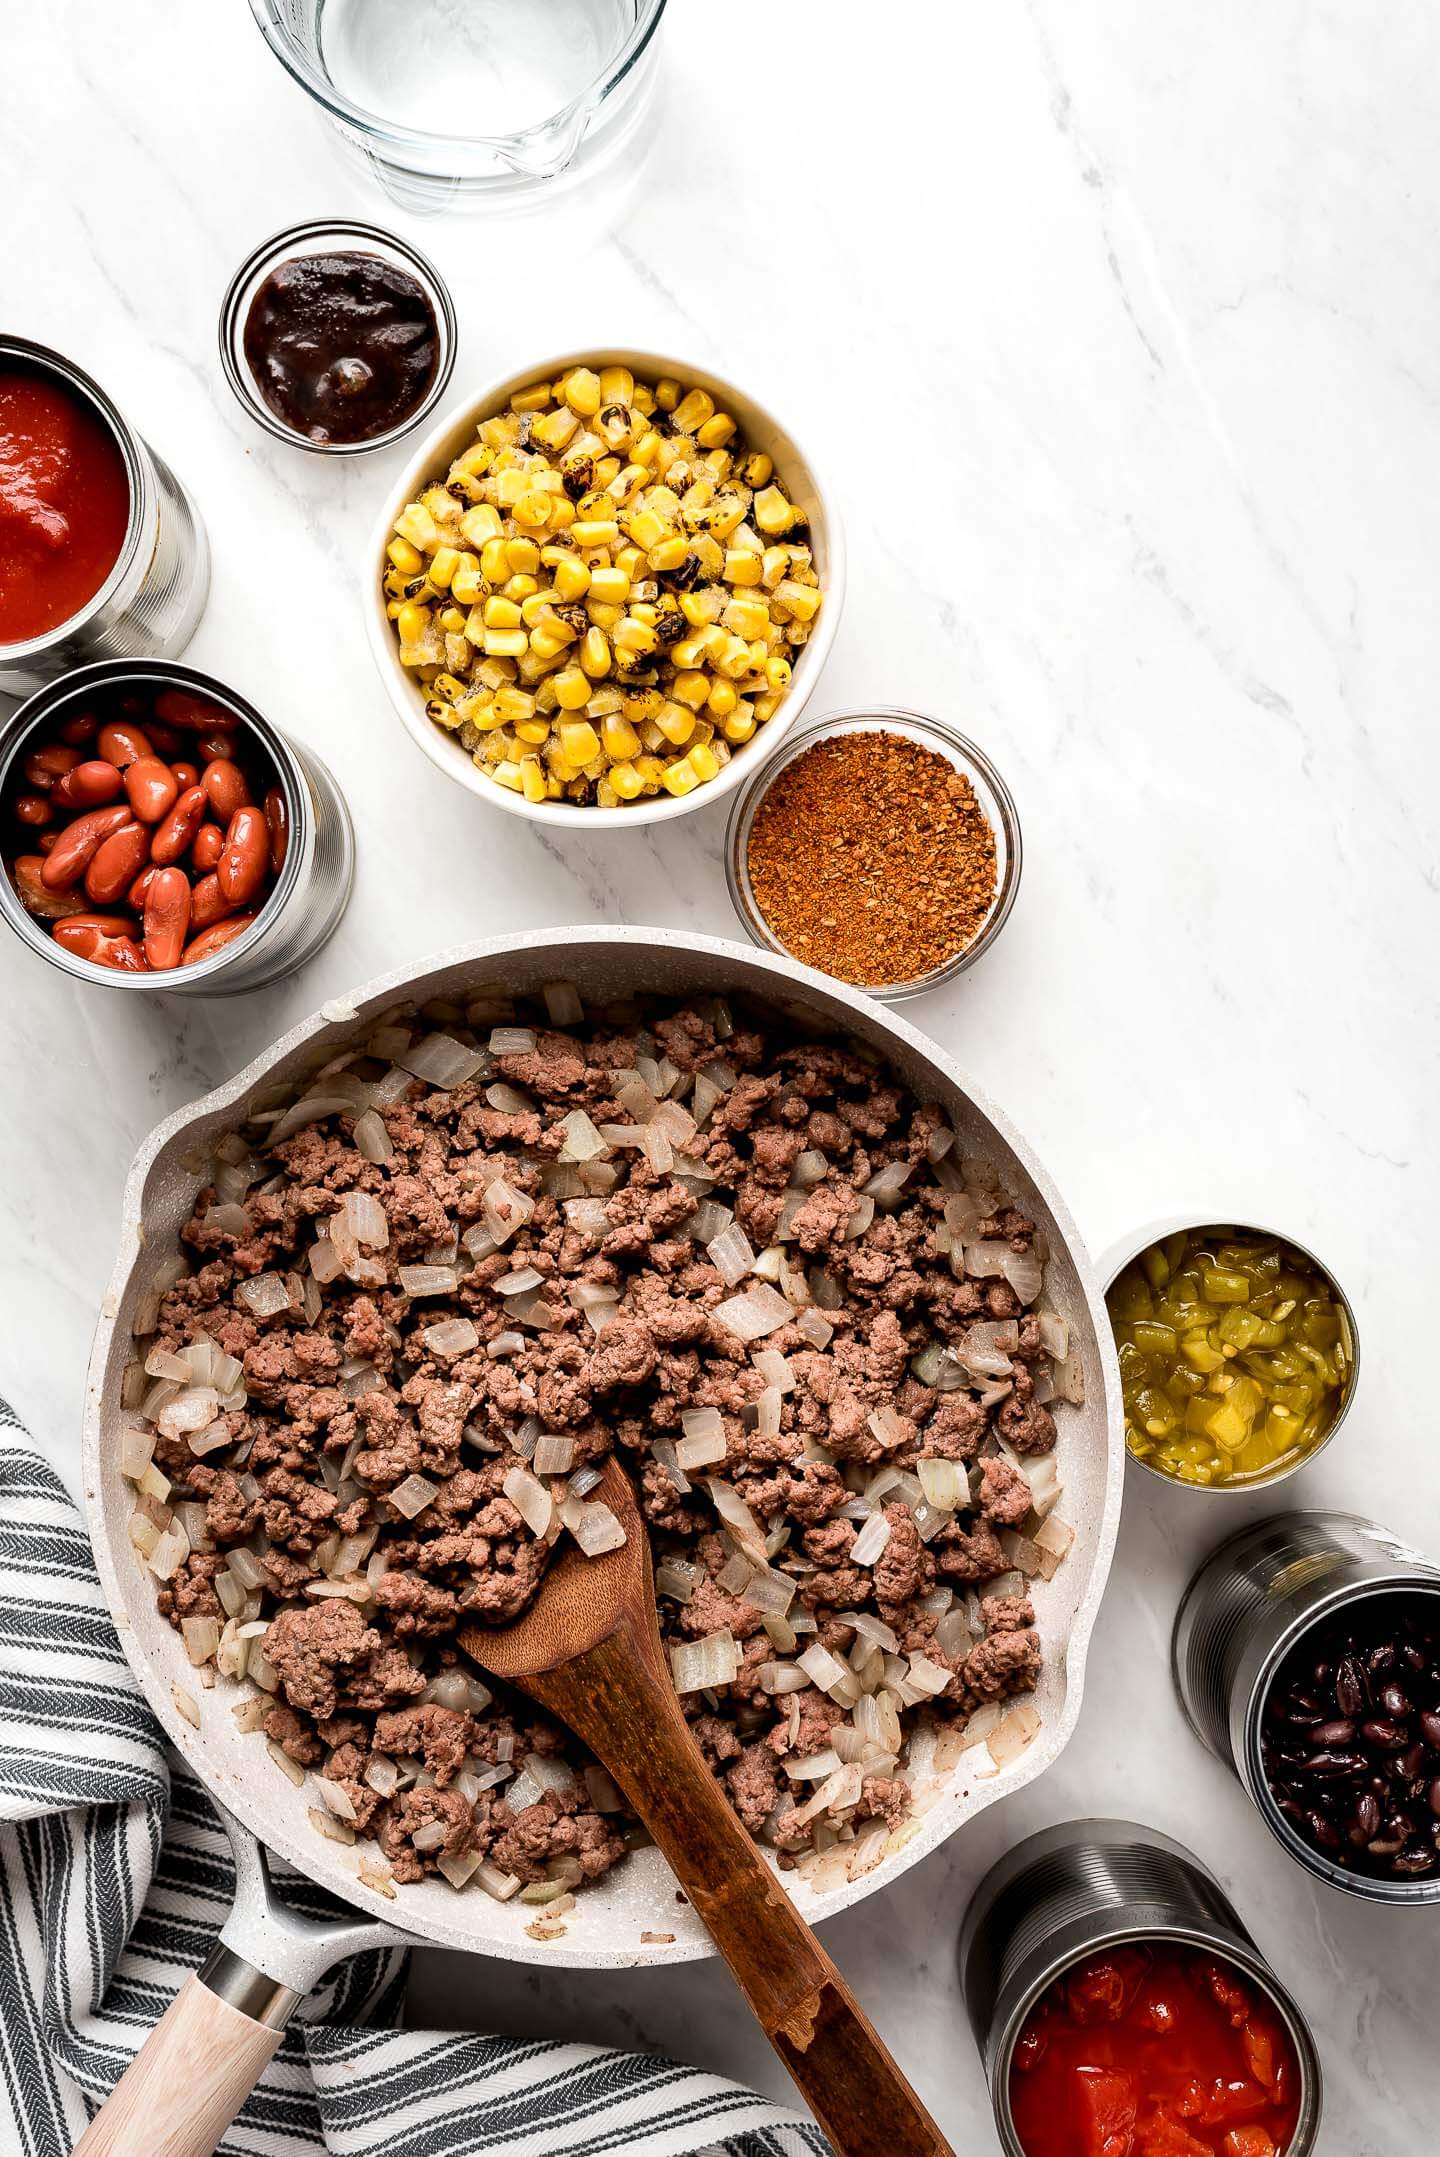 A skillet of browned ground beef and onions, bowl of frozen corn, seasoning, cans of beans, diced green chilies, tomatoes, and tomato sauce.